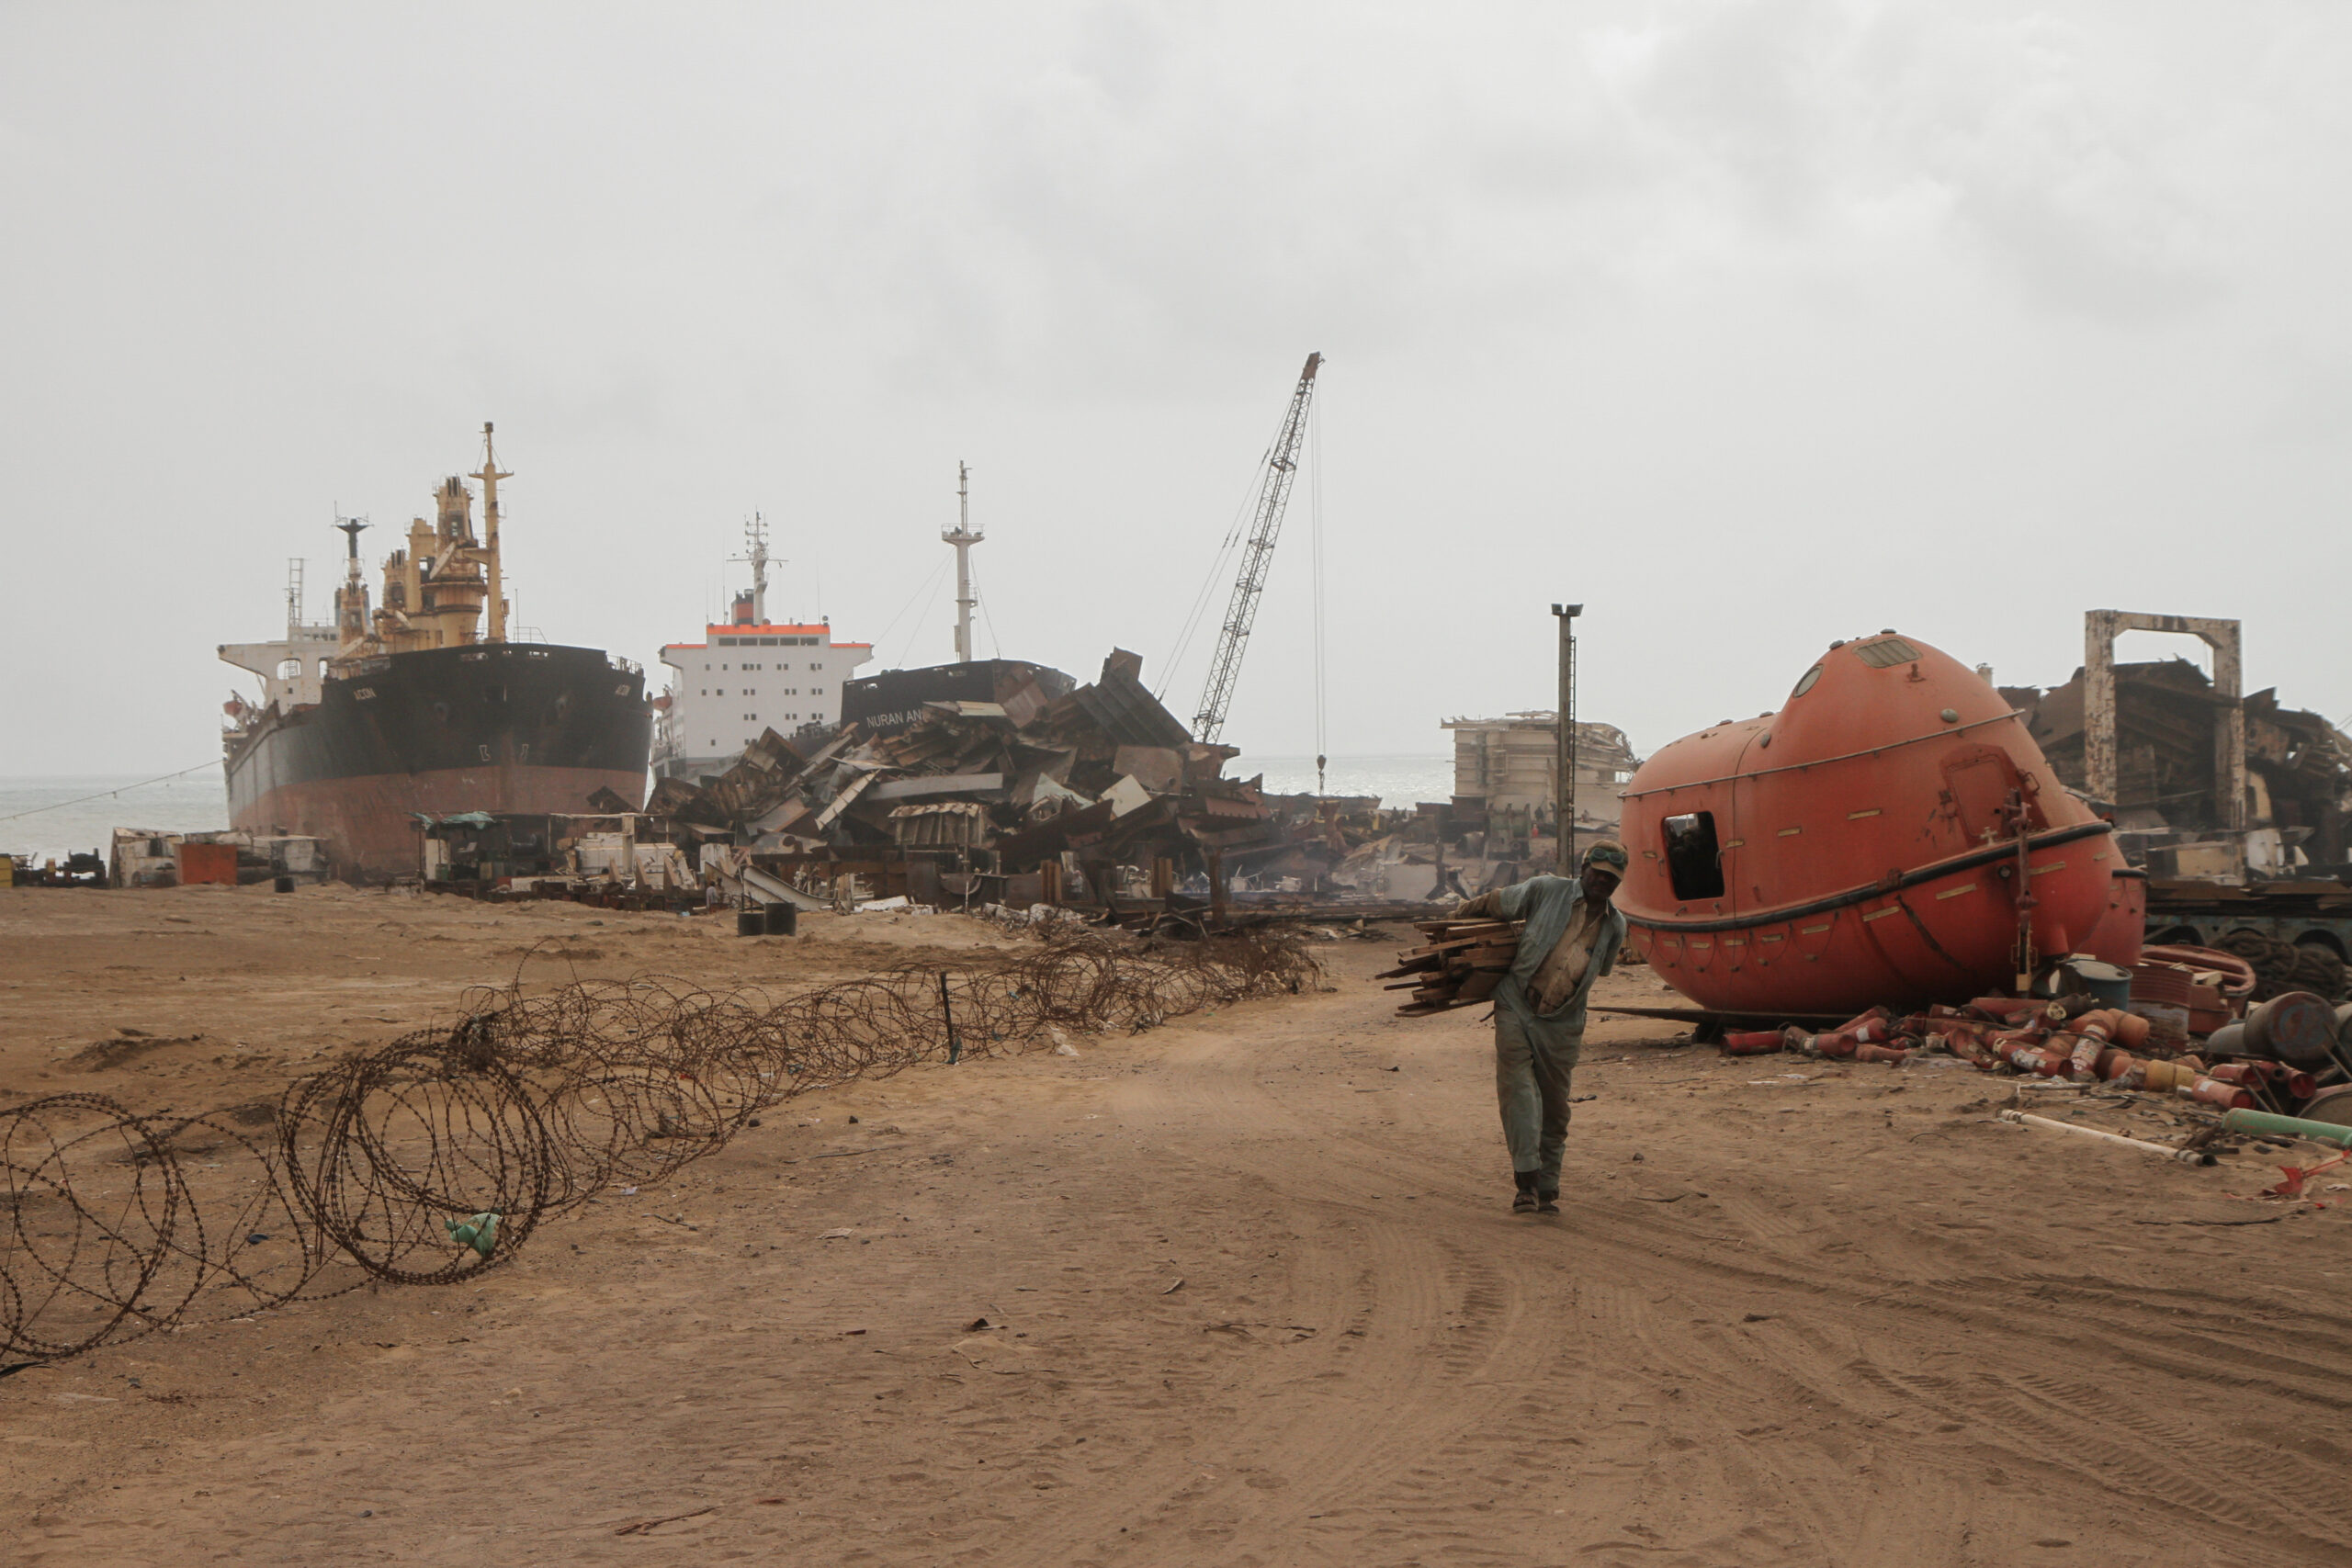 Press Release – Pakistani workers poisoned during scrapping of infamous mercury-laden tanker